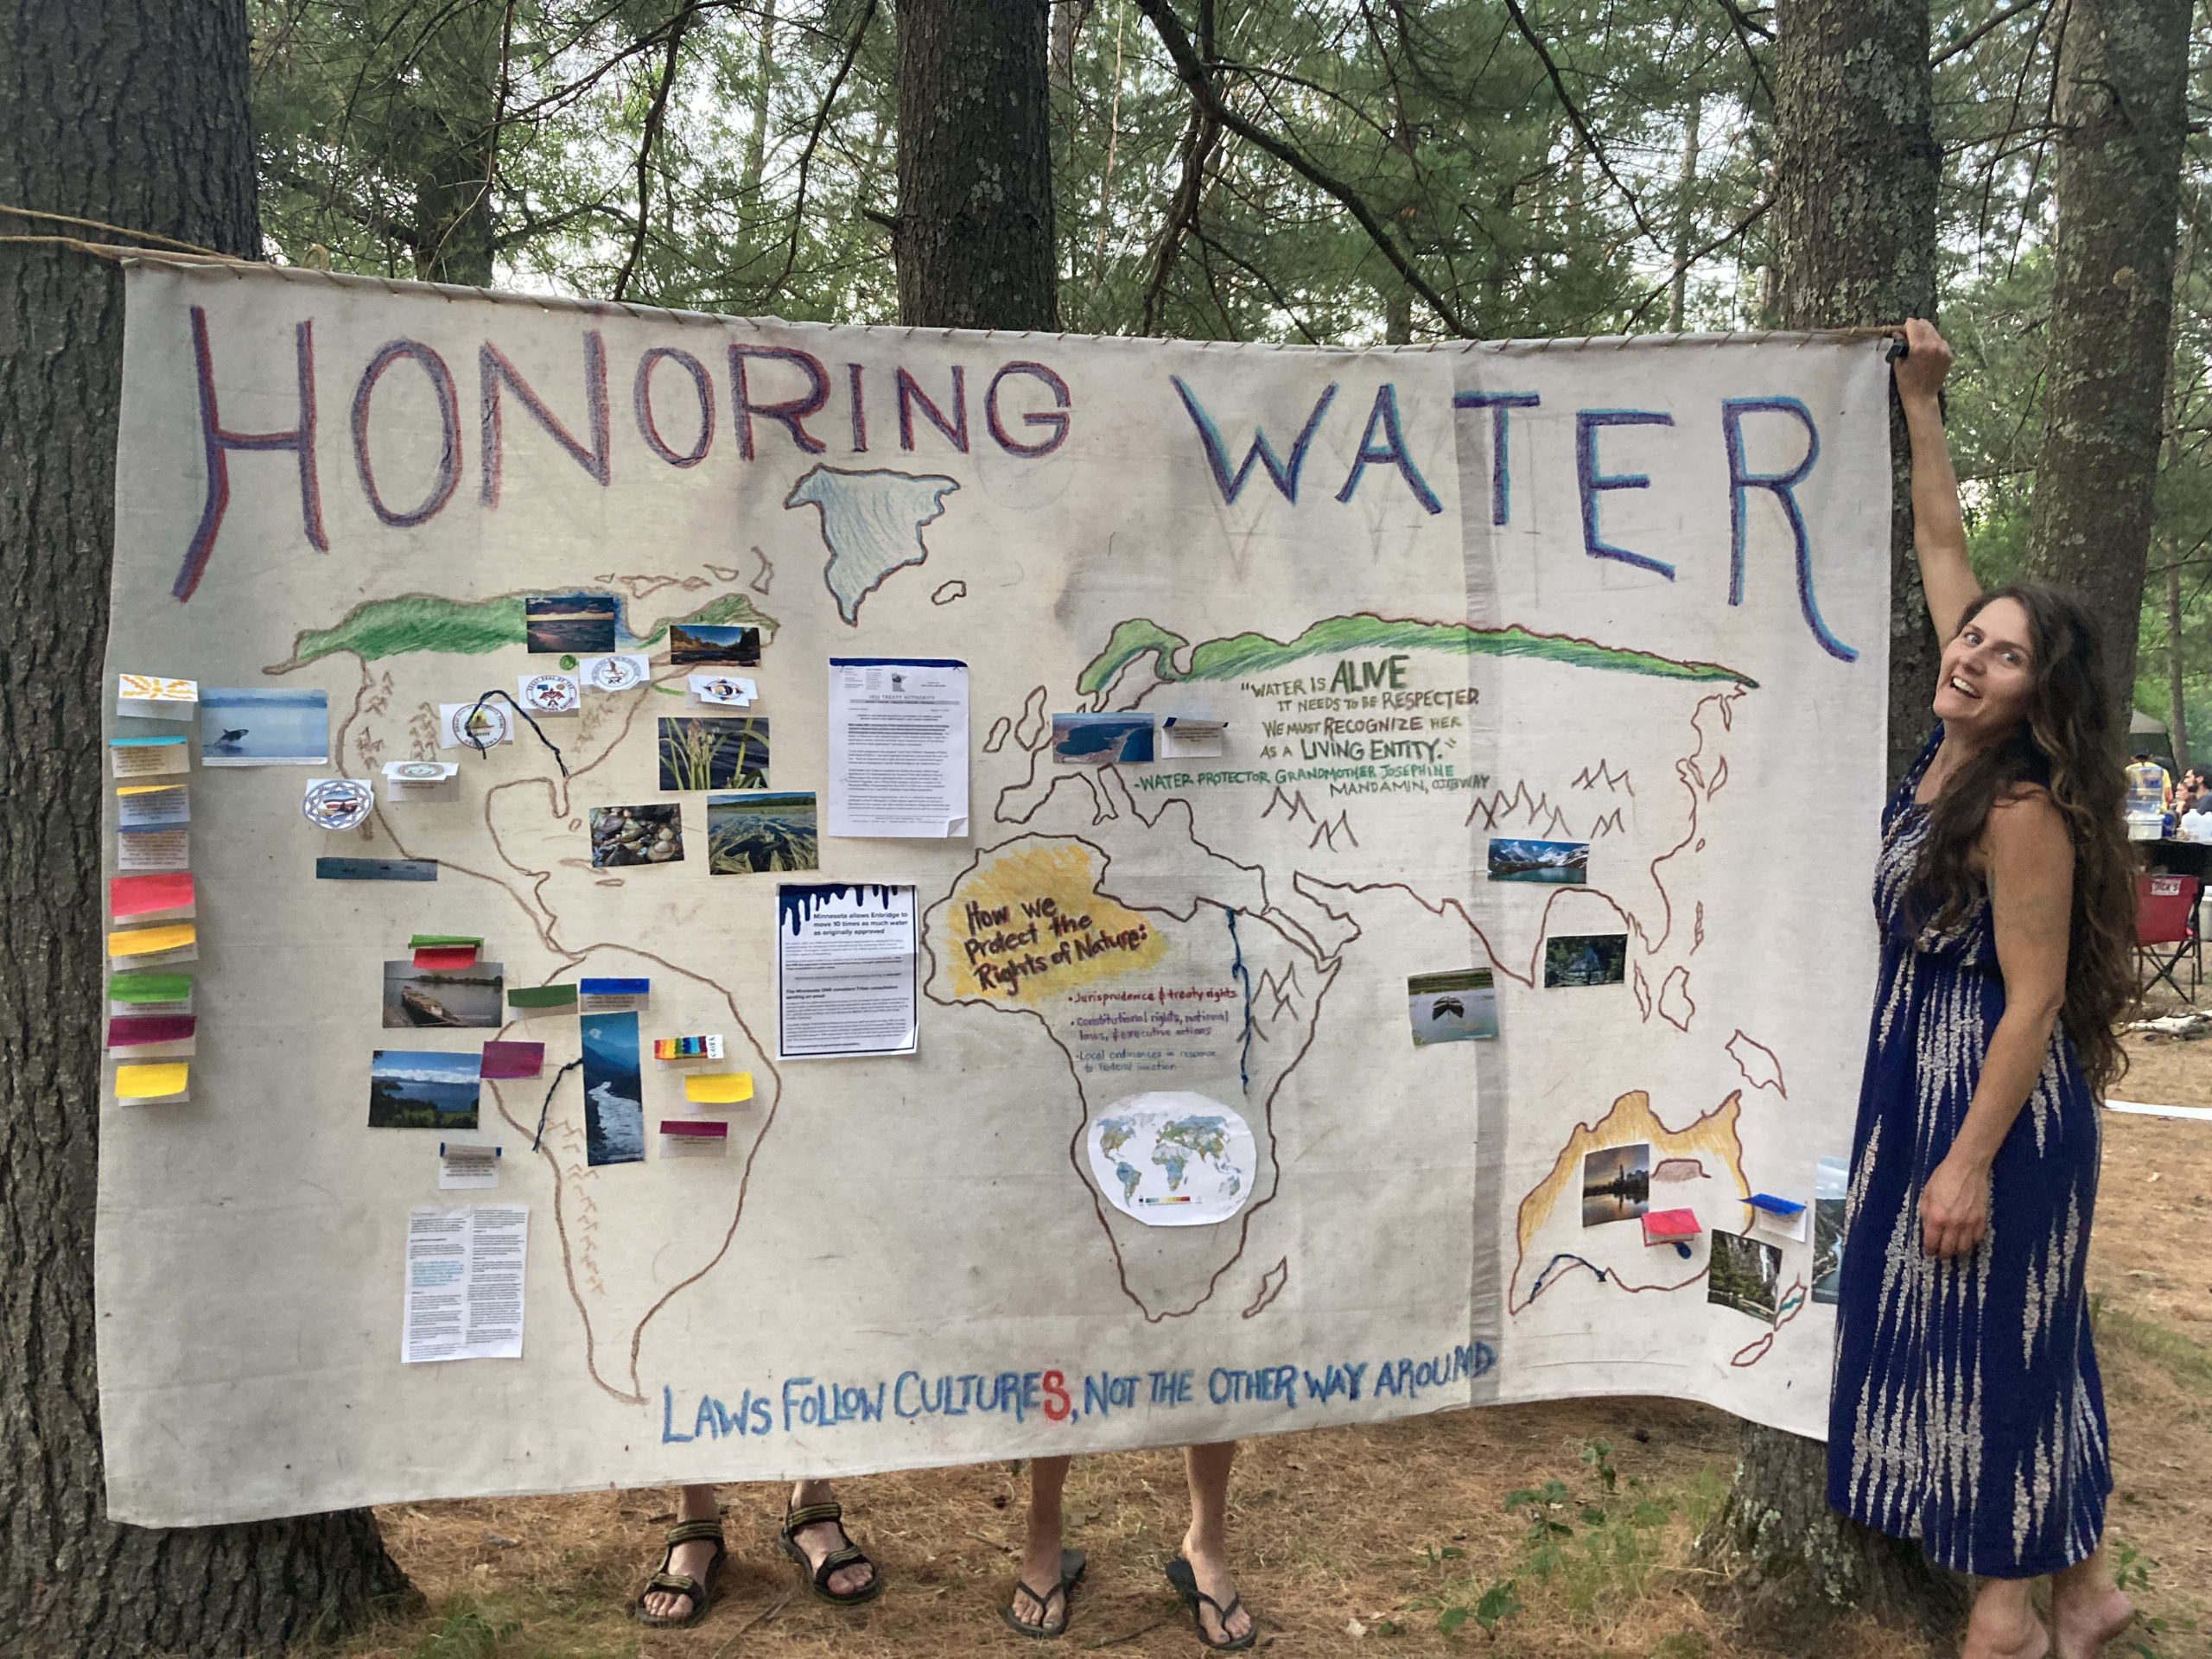 <span style="font-family: georgia, palatino, serif;">Chelsea Fairbank, completing her Ph.D. in anthropology at the University of Maine, installs an Honoring Water art project at the Shell City Campground in July, 2021. The project is based on her doctoral research that focuses on large-scale fossil-fuel extraction sites, and the peoples impacted in these zones.</span>